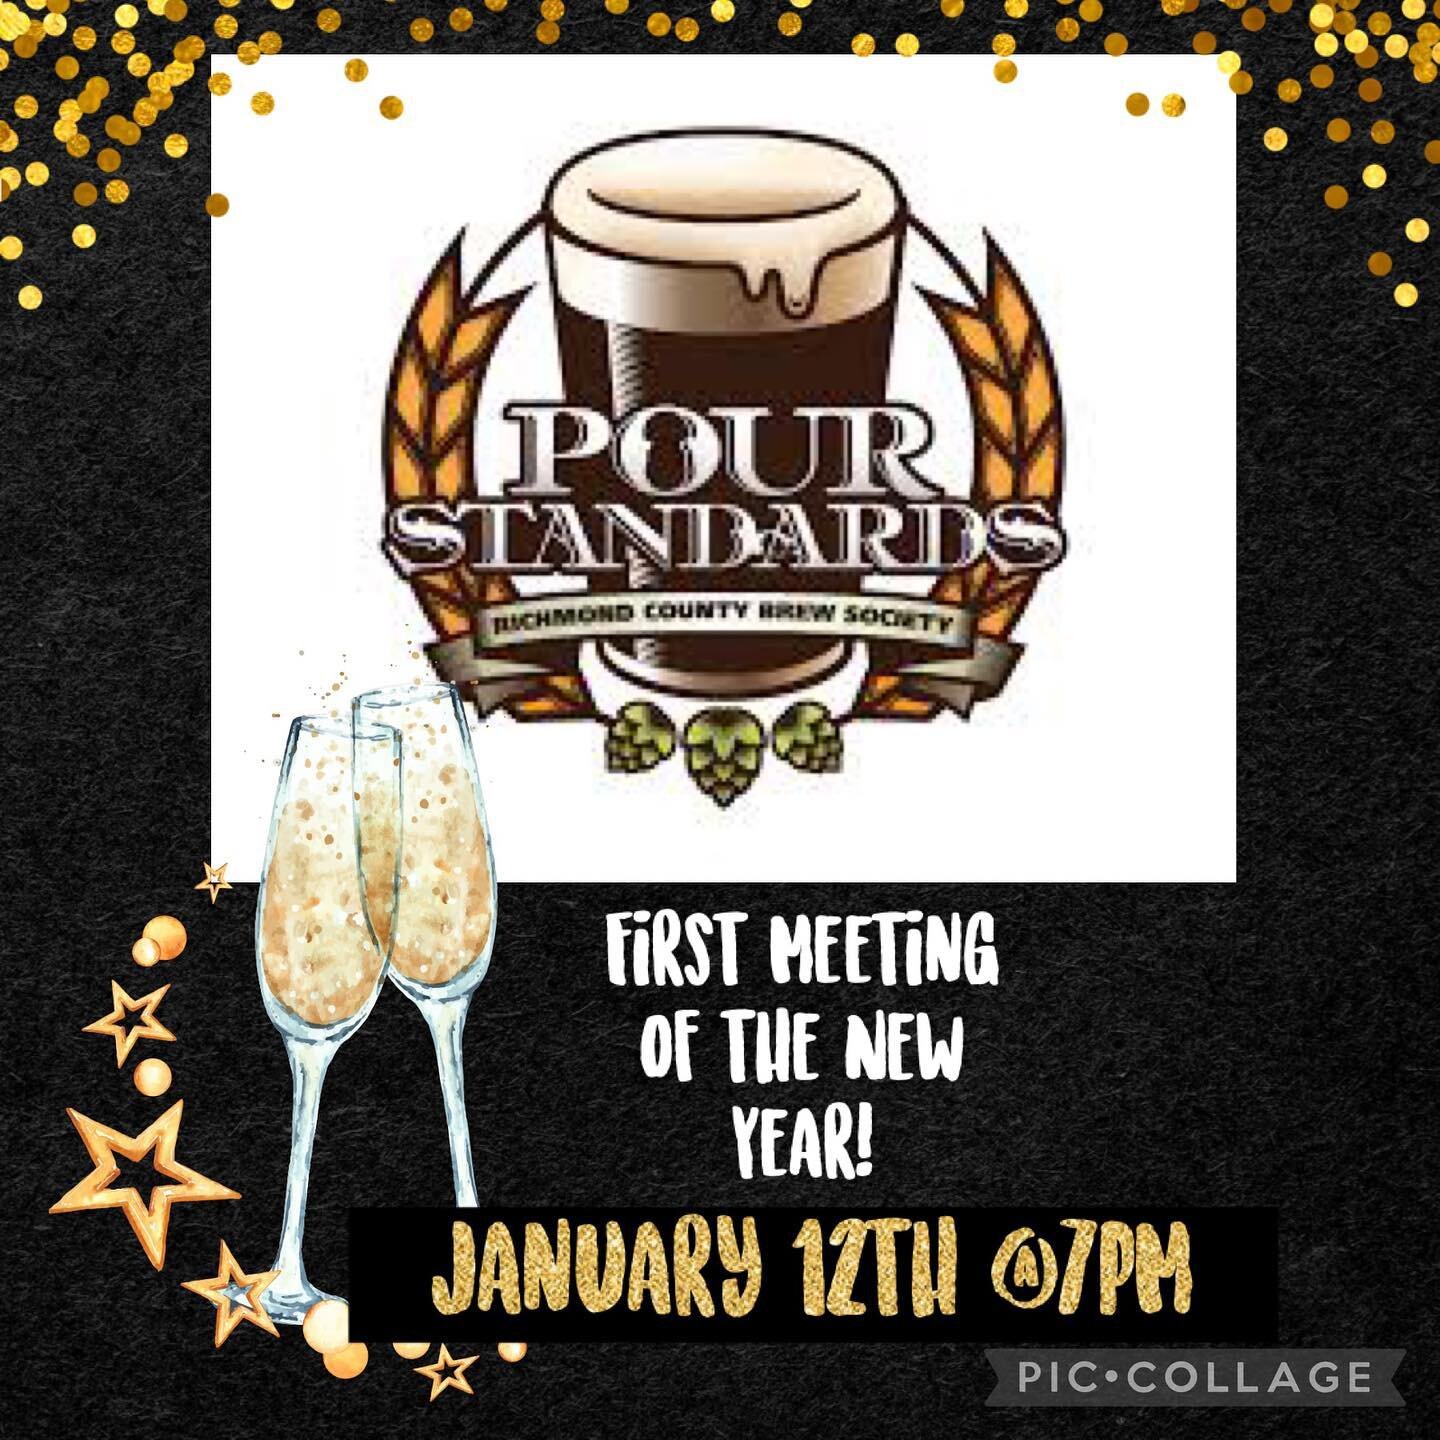 Come join us at Flagship Brewery for our first meeting of the new year! We will discuss our plans for the upcoming year and share some homebrew.